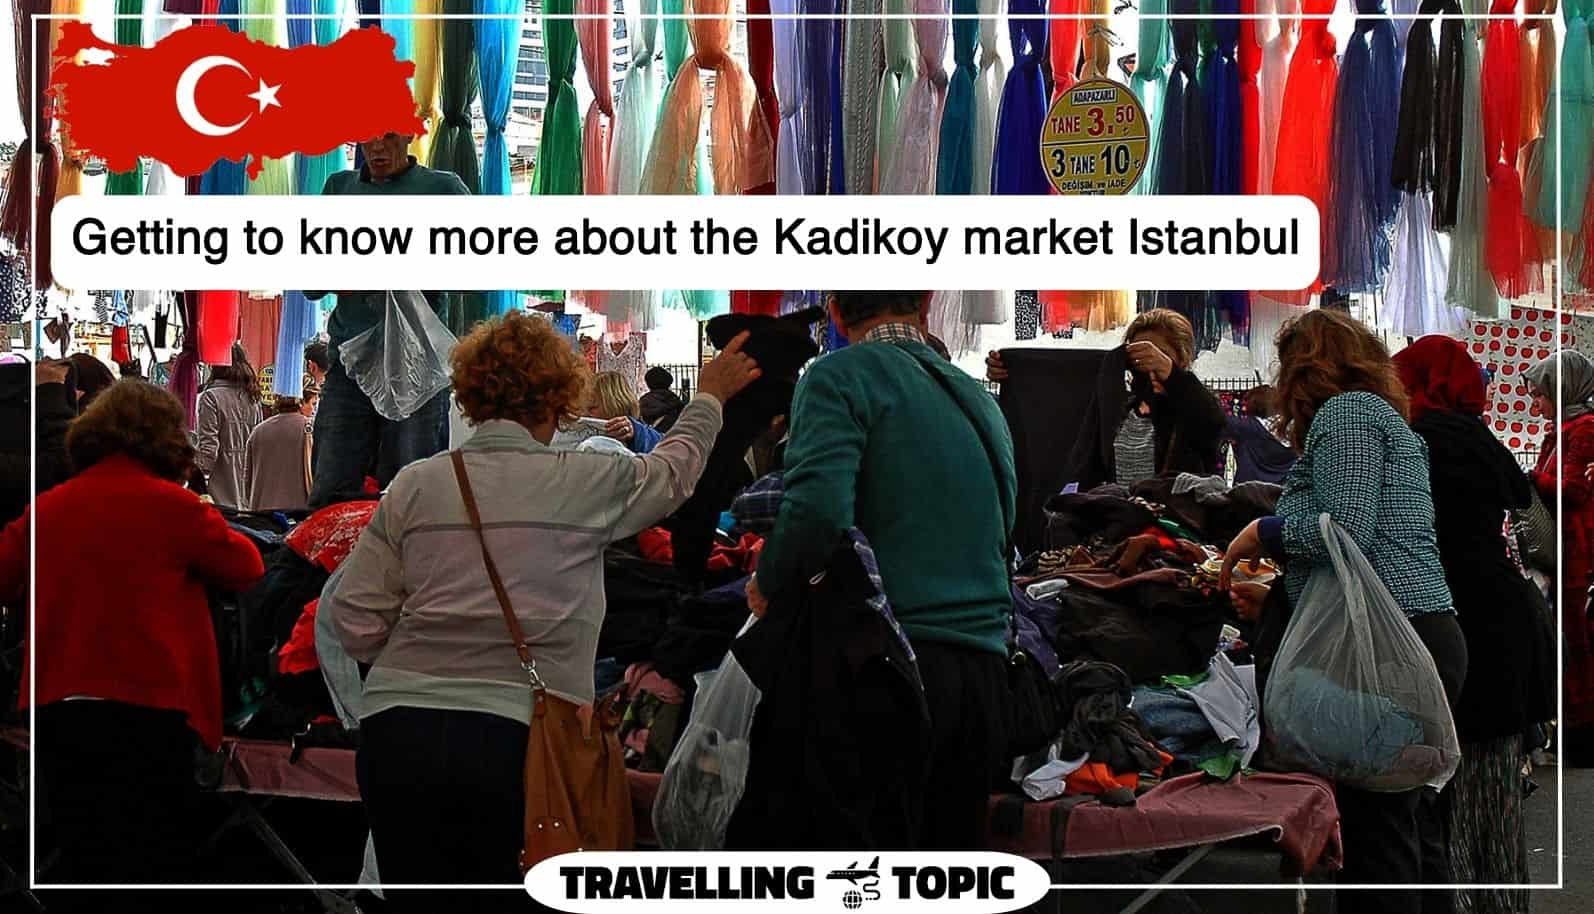 Getting to know more about the Kadikoy market Istanbul